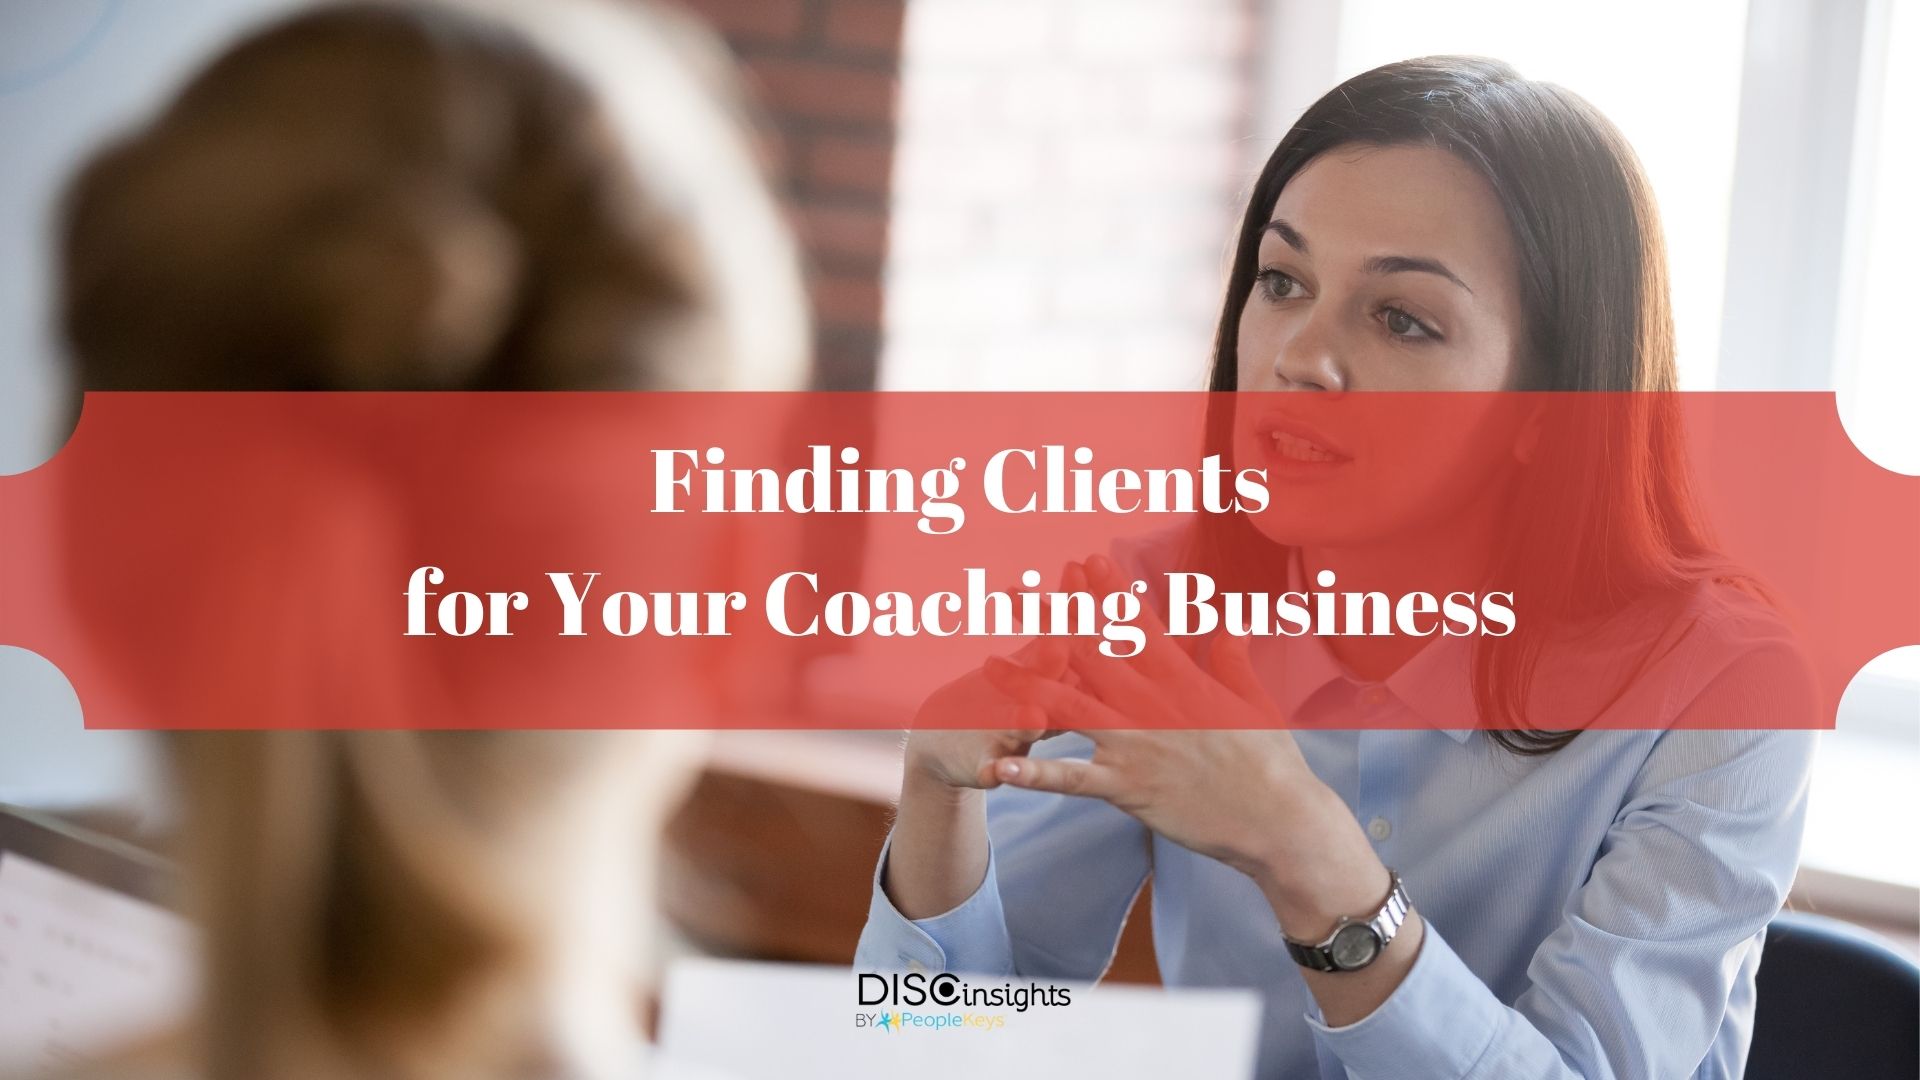 Finding Clients for Your Coaching Business